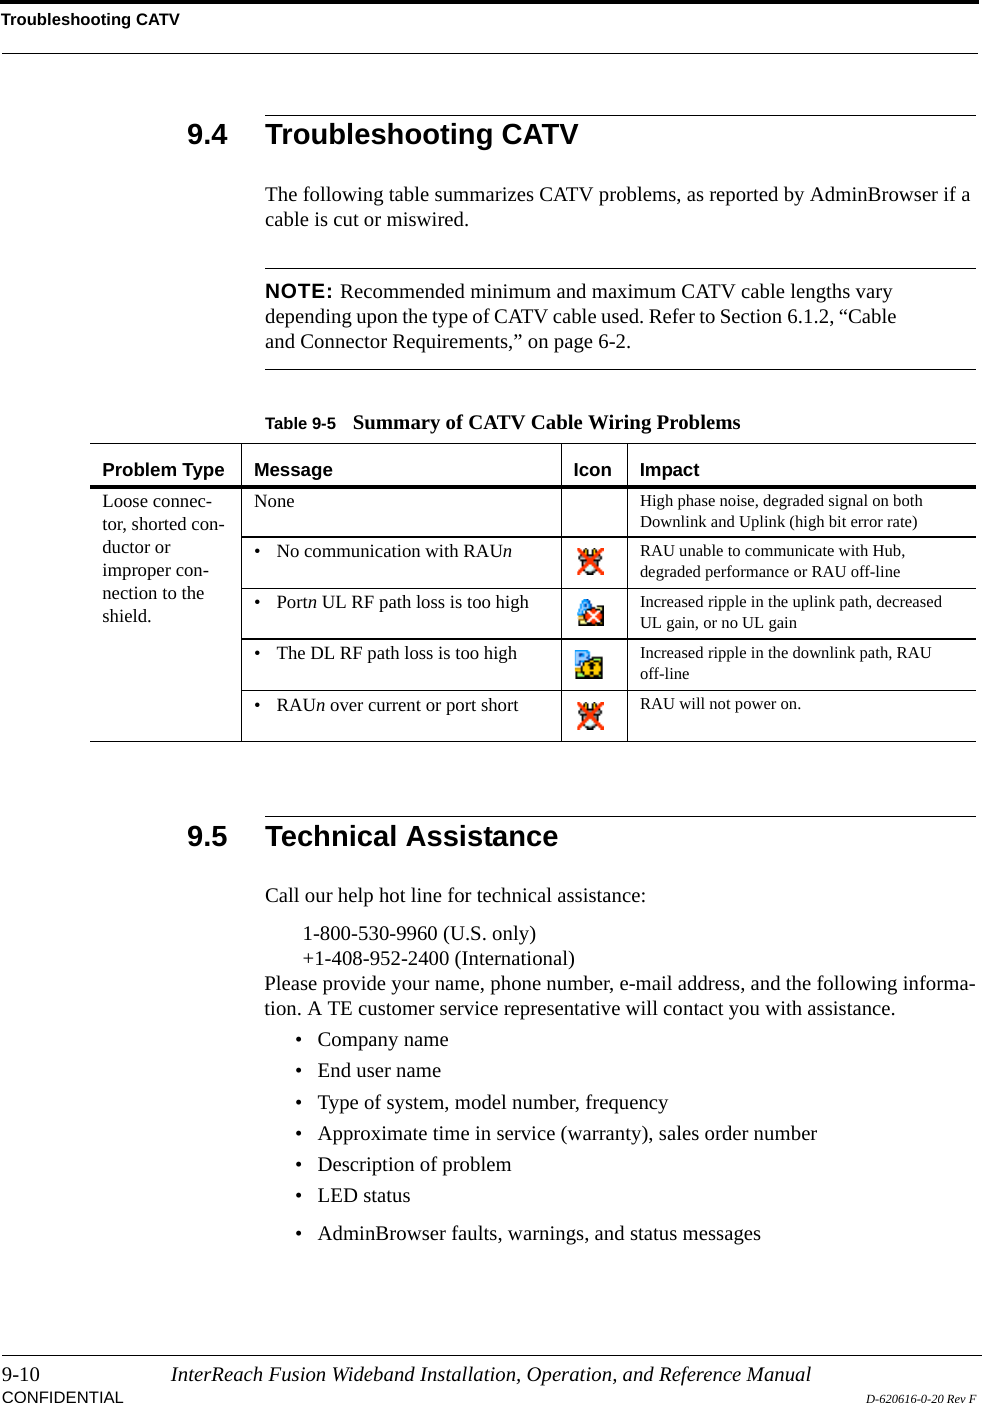 Troubleshooting CATV9-10 InterReach Fusion Wideband Installation, Operation, and Reference ManualCONFIDENTIAL D-620616-0-20 Rev F9.4 Troubleshooting CATVThe following table summarizes CATV problems, as reported by AdminBrowser if a cable is cut or miswired.NOTE: Recommended minimum and maximum CATV cable lengths vary depending upon the type of CATV cable used. Refer to Section 6.1.2, “Cable and Connector Requirements,” on page 6-2.9.5 Technical AssistanceCall our help hot line for technical assistance:1-800-530-9960 (U.S. only)+1-408-952-2400 (International)Please provide your name, phone number, e-mail address, and the following informa-tion. A TE customer service representative will contact you with assistance.• Company name• End user name• Type of system, model number, frequency• Approximate time in service (warranty), sales order number• Description of problem• LED status• AdminBrowser faults, warnings, and status messagesTable 9-5 Summary of CATV Cable Wiring ProblemsProblem Type Message Icon ImpactLoose connec-tor, shorted con-ductor or improper con-nection to the shield.None High phase noise, degraded signal on both Downlink and Uplink (high bit error rate)• No communication with RAUn  RAU unable to communicate with Hub, degraded performance or RAU off-line• Portn UL RF path loss is too high Increased ripple in the uplink path, decreased UL gain, or no UL gain• The DL RF path loss is too high Increased ripple in the downlink path, RAU off-line•RAUn over current or port short RAU will not power on.